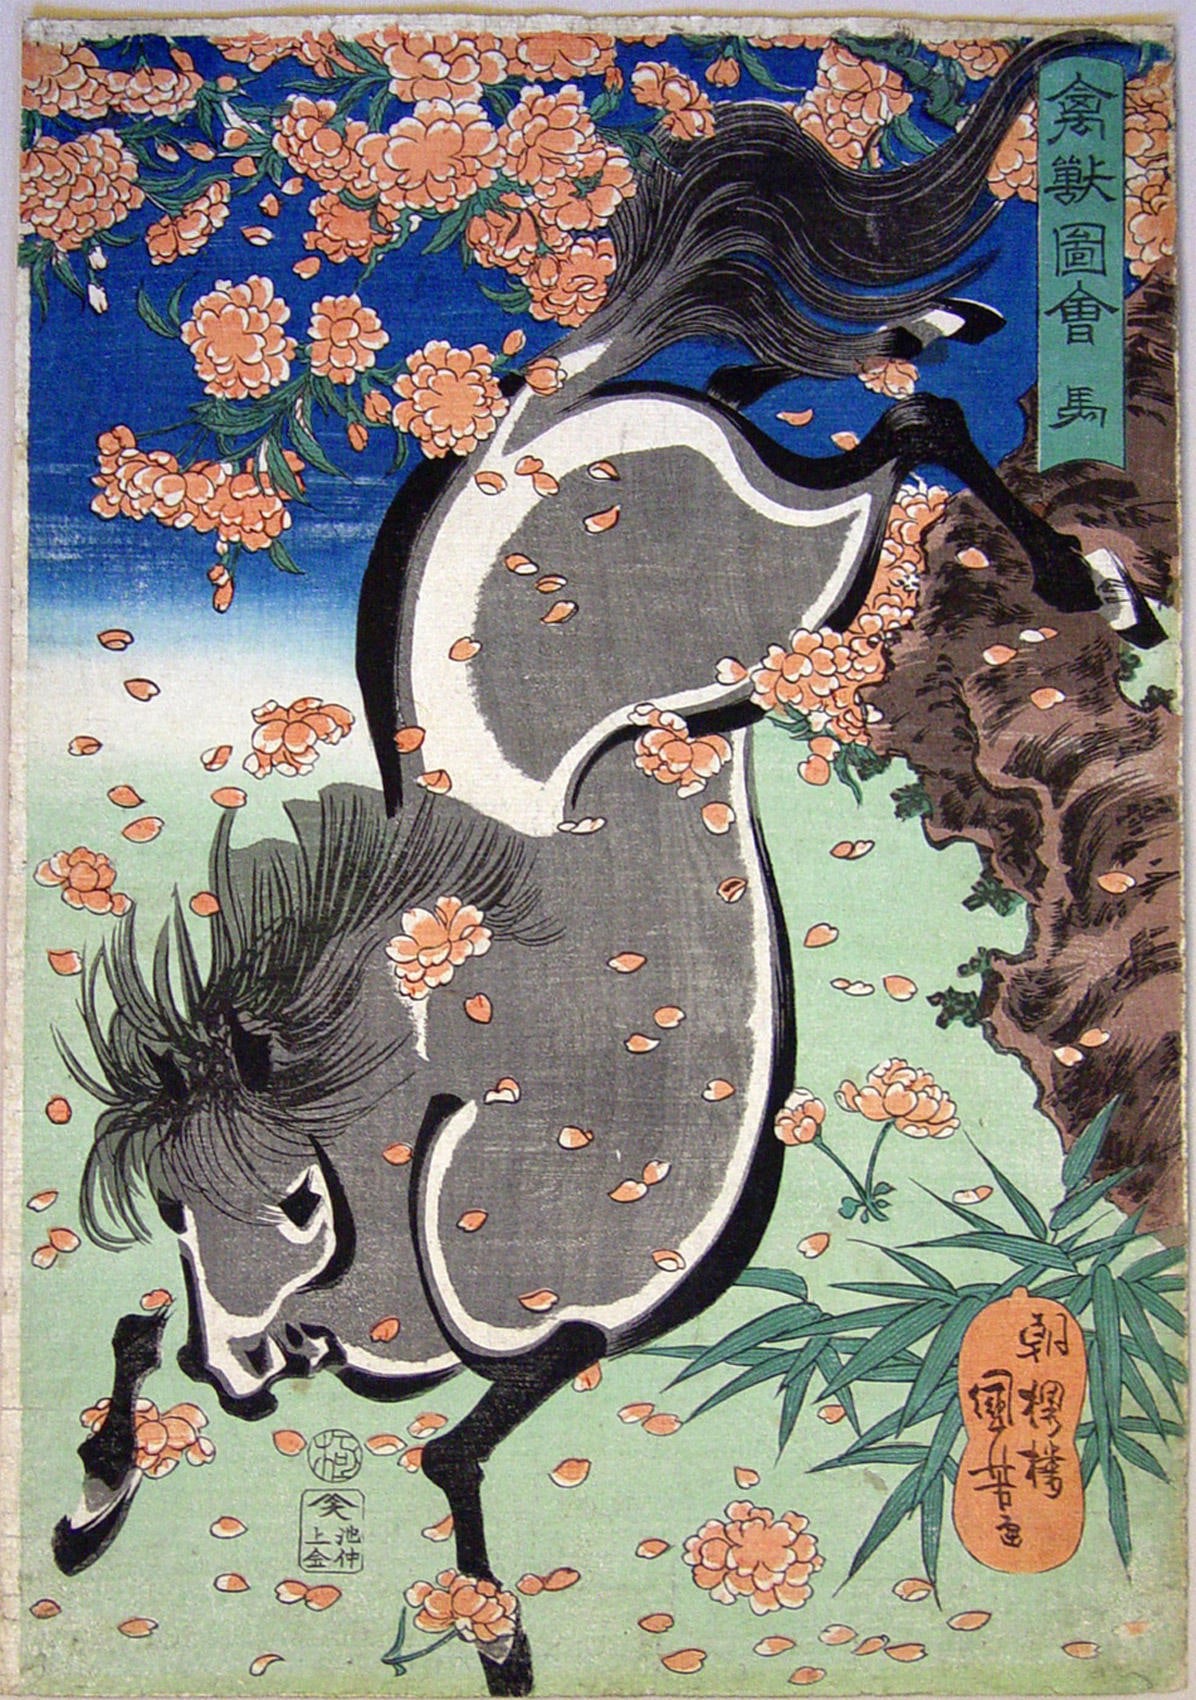 UTAGAWA KUNIYOSHI A leaping horse from the series Drawings of Birds and Beasts 